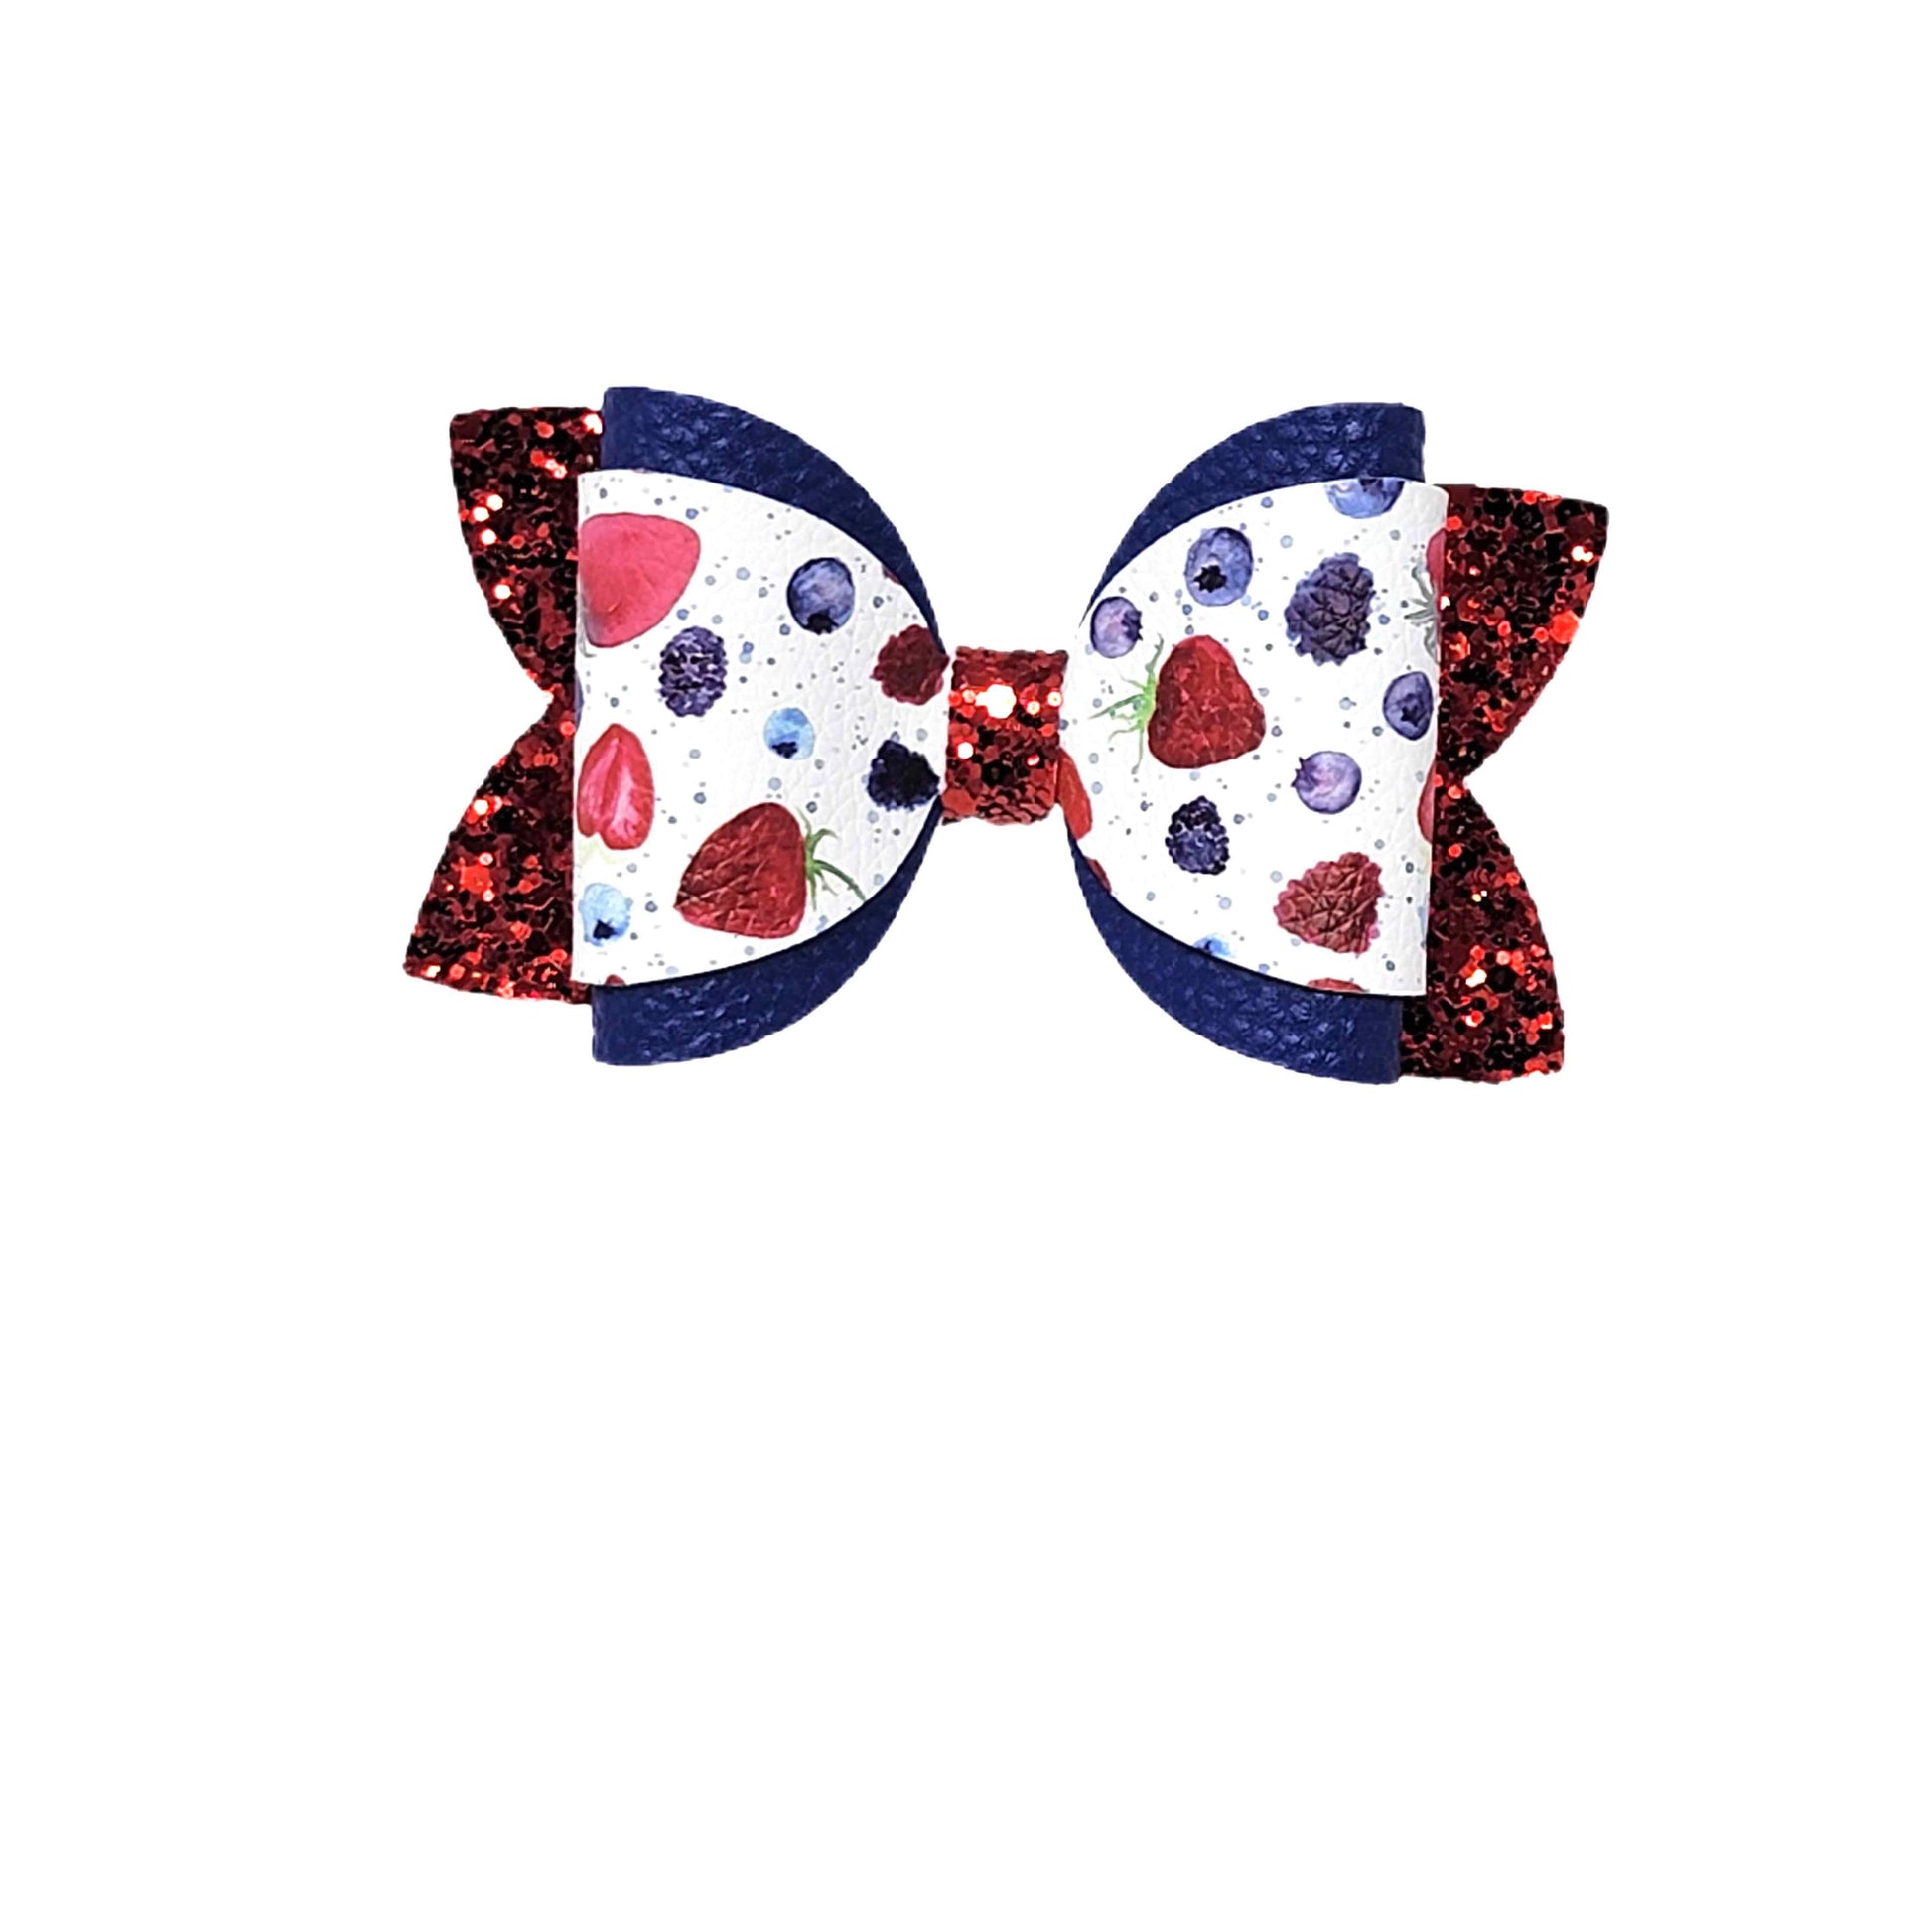 Mixed Berries Dressed-up Diva Bow 4"